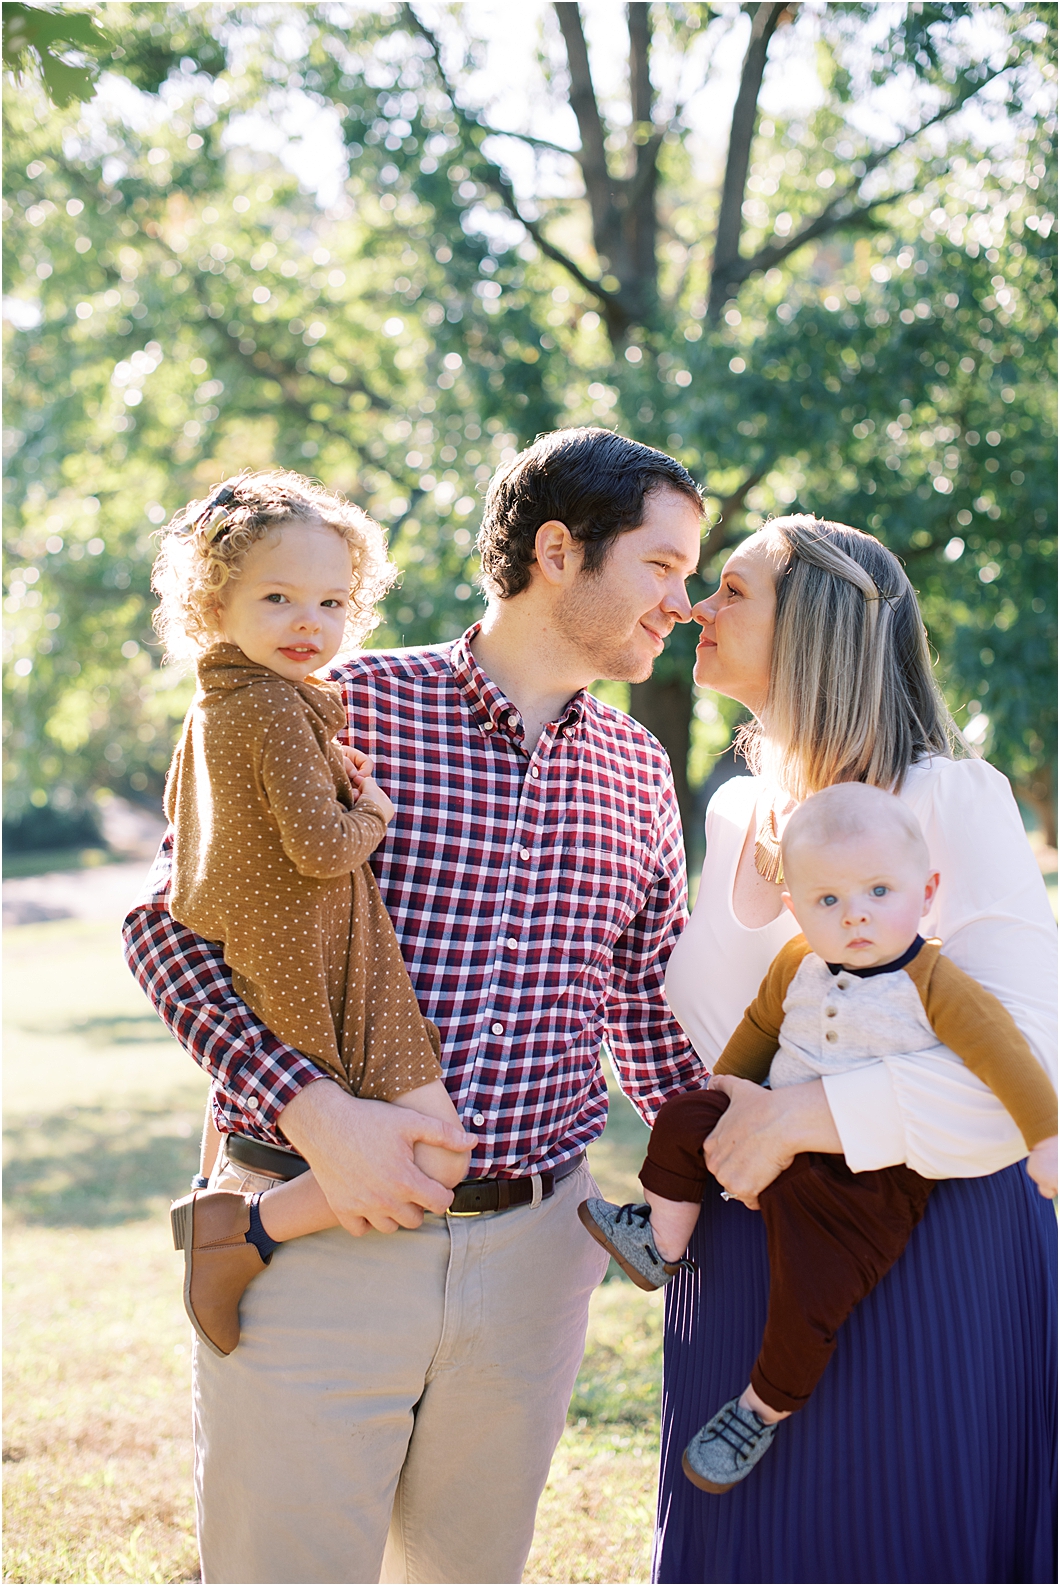 What to wear for family photos, outfit inspiration for family photos | by Hillary Muelleck